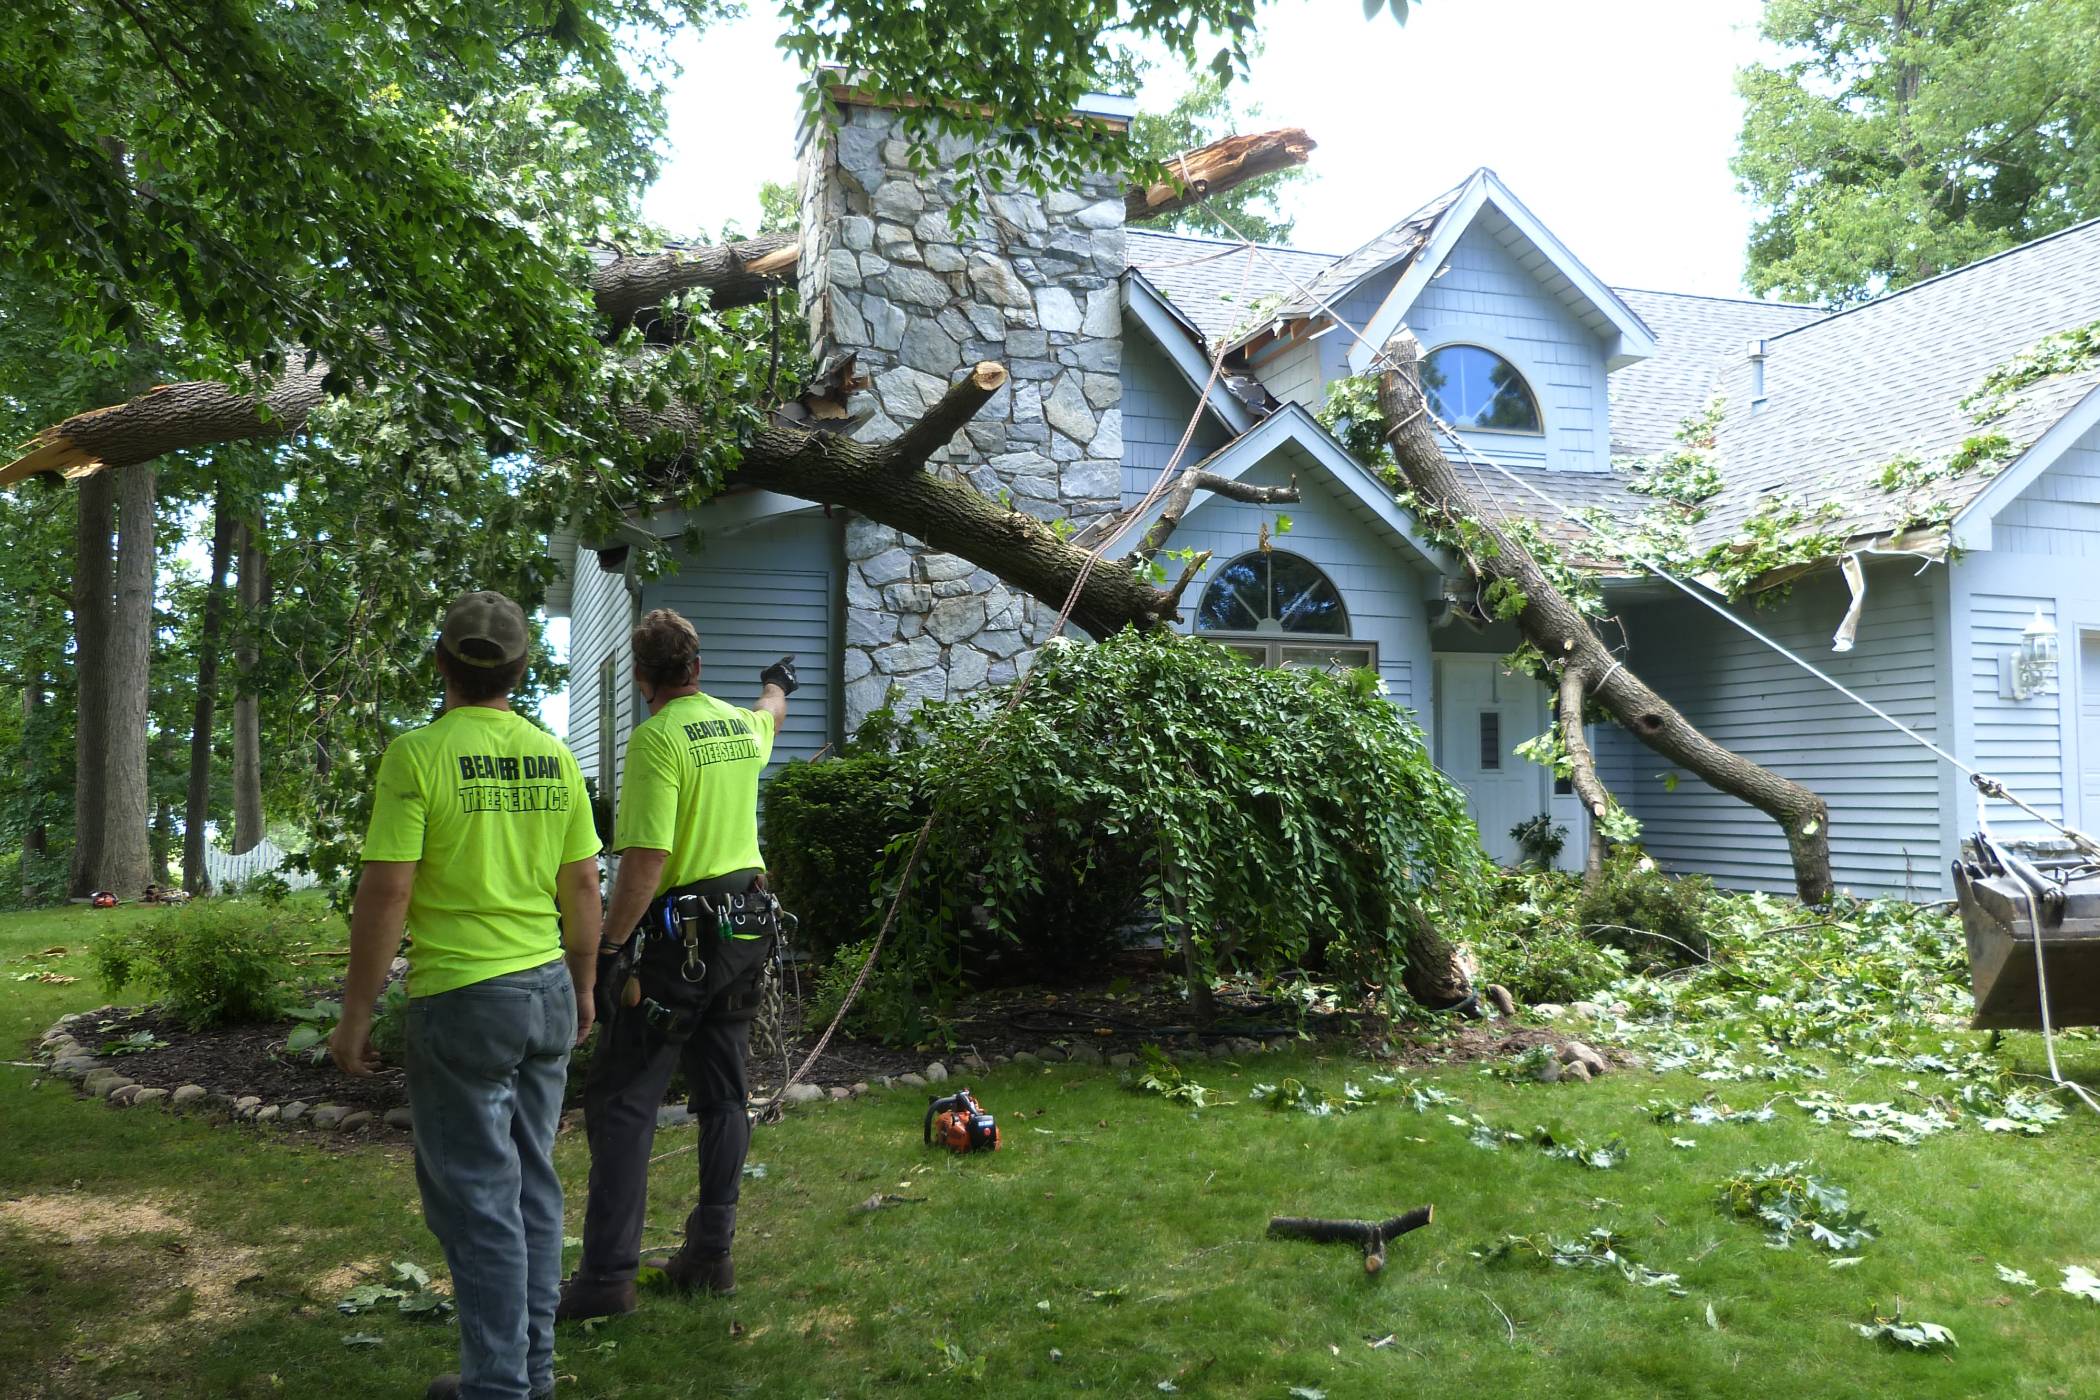 Two Beaver Dam Tree Service employees assessing how to safely remove a tree that has fallen onto a house.